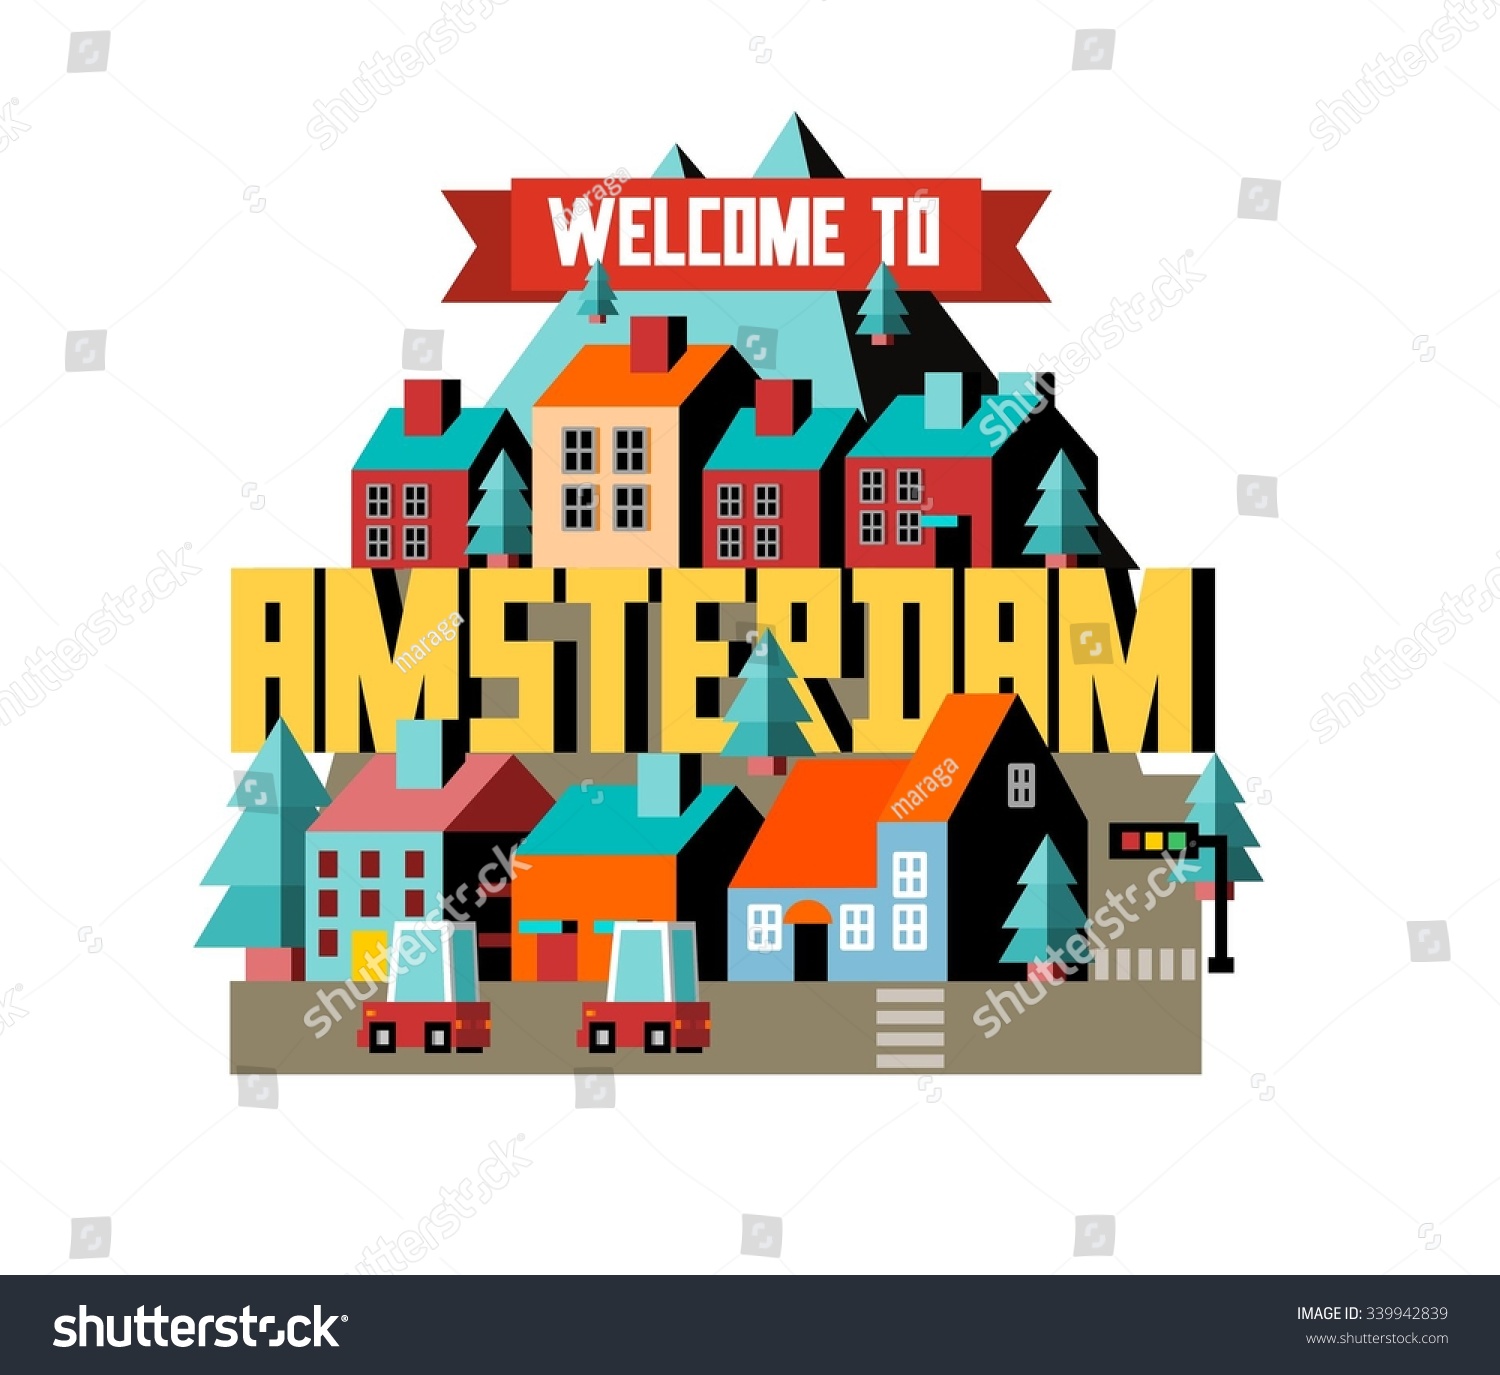 Amsterdam city in is a beautiful destination to visit for tourism. #339942839